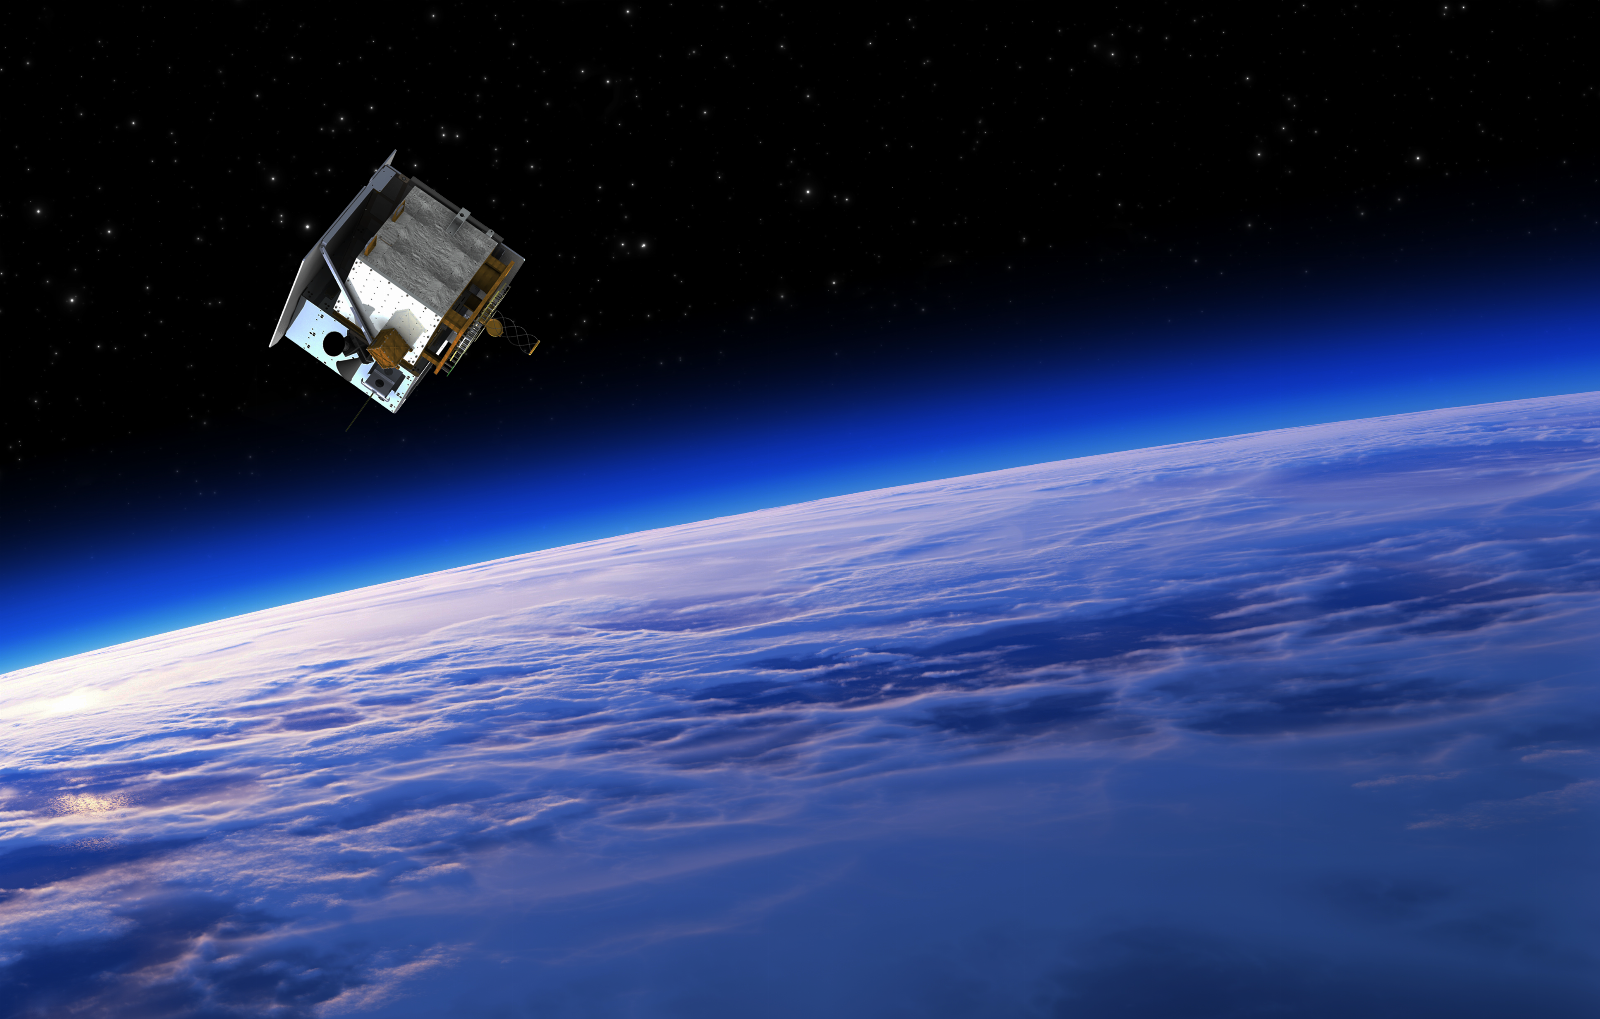 With $20M in new funding, Hydrosat preps climate-monitoring satellites for launch